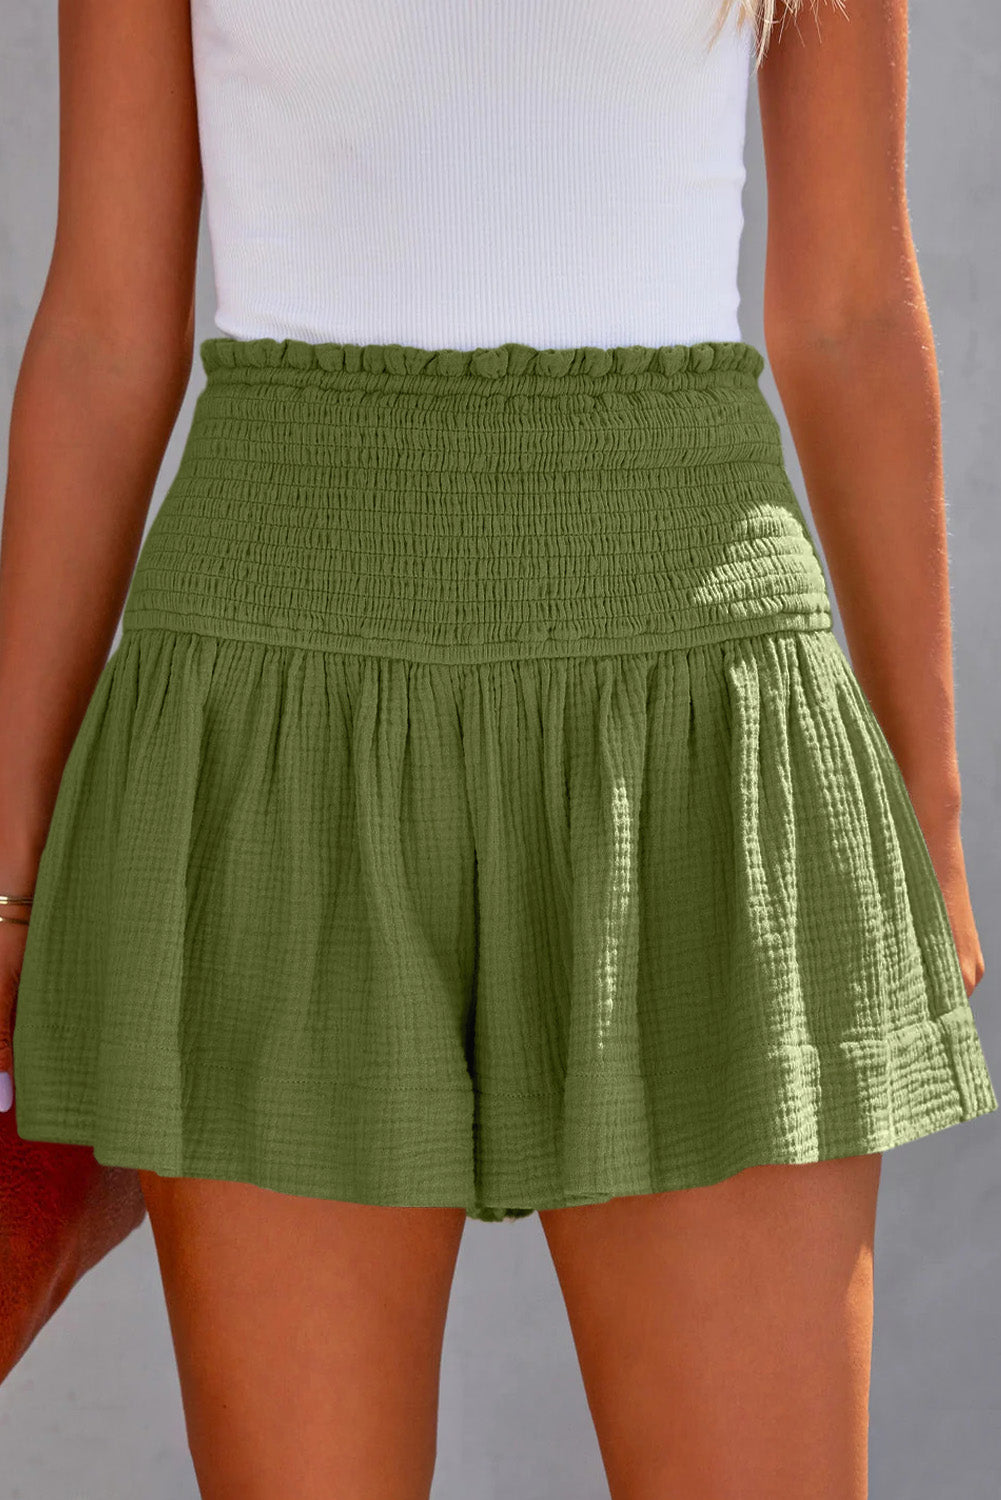 Shop versatile Smocked Waistband Shorts in black, moss, or blue. Perfect blend of style & comfort for any casual occasion.